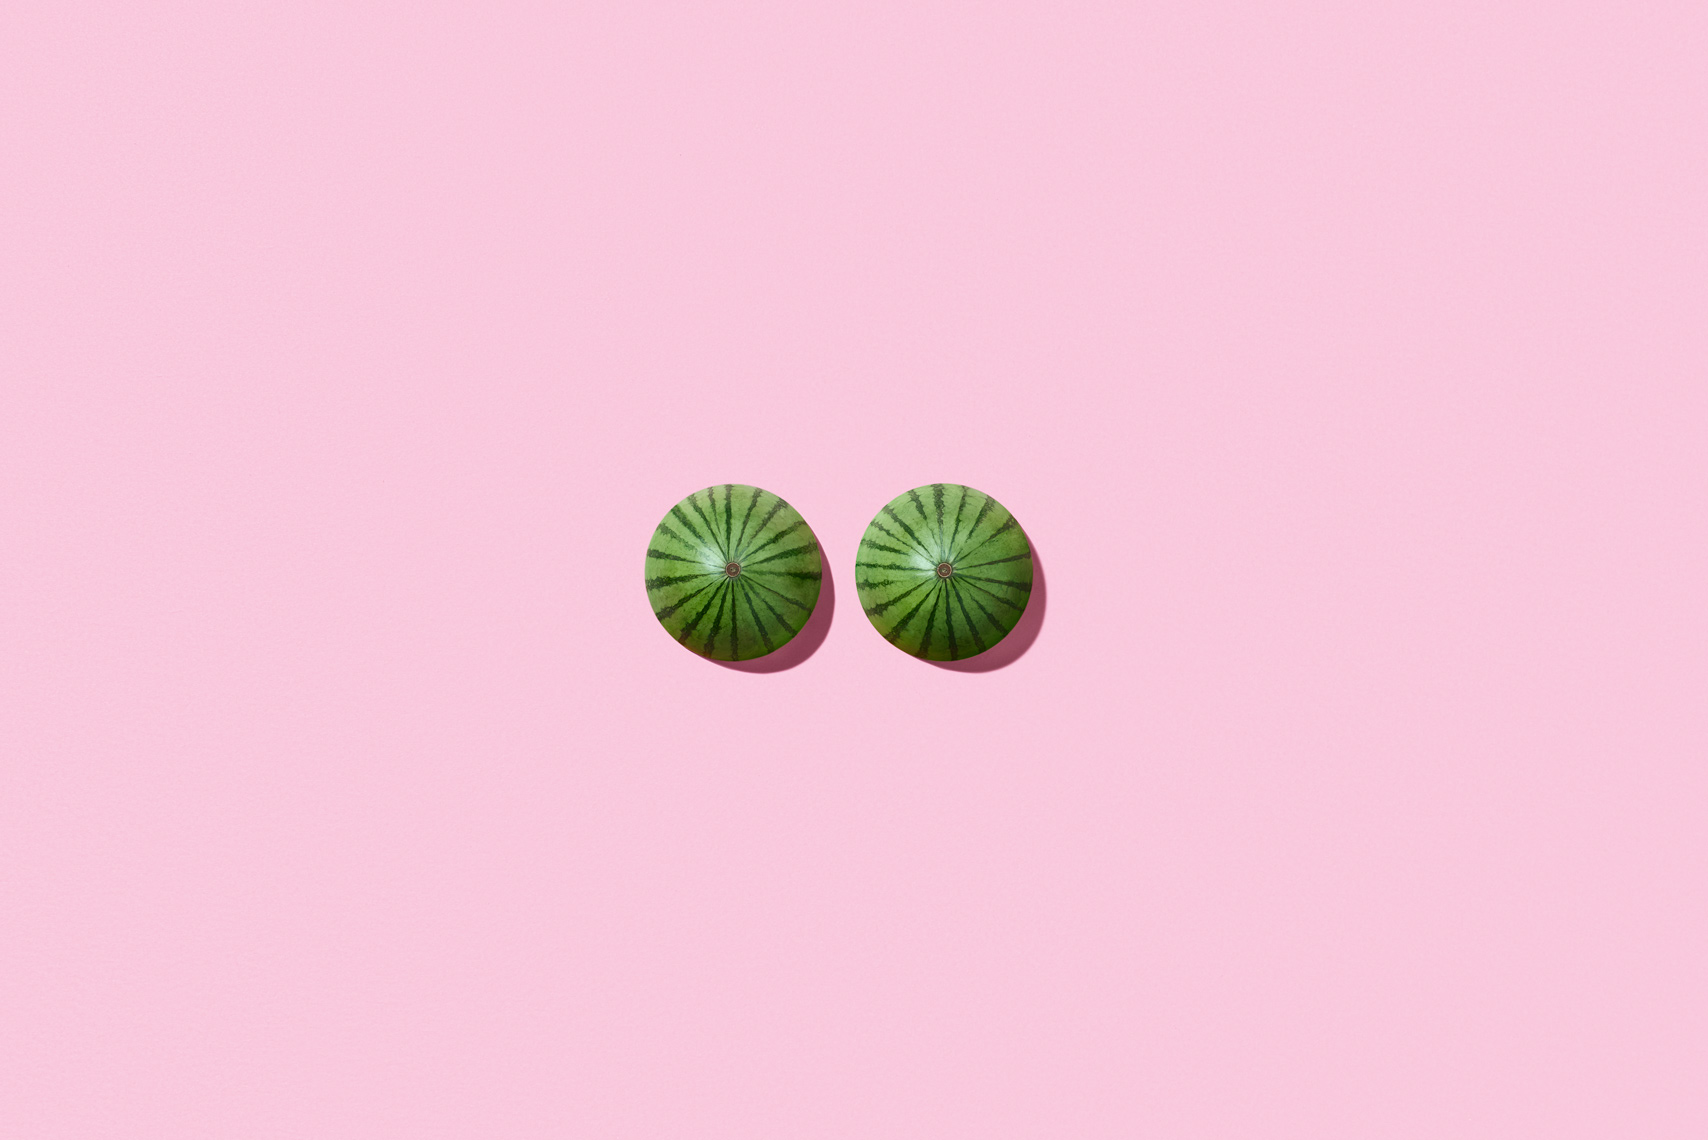 Melons. Conceptual still life photography with a minimal style and quirky humor